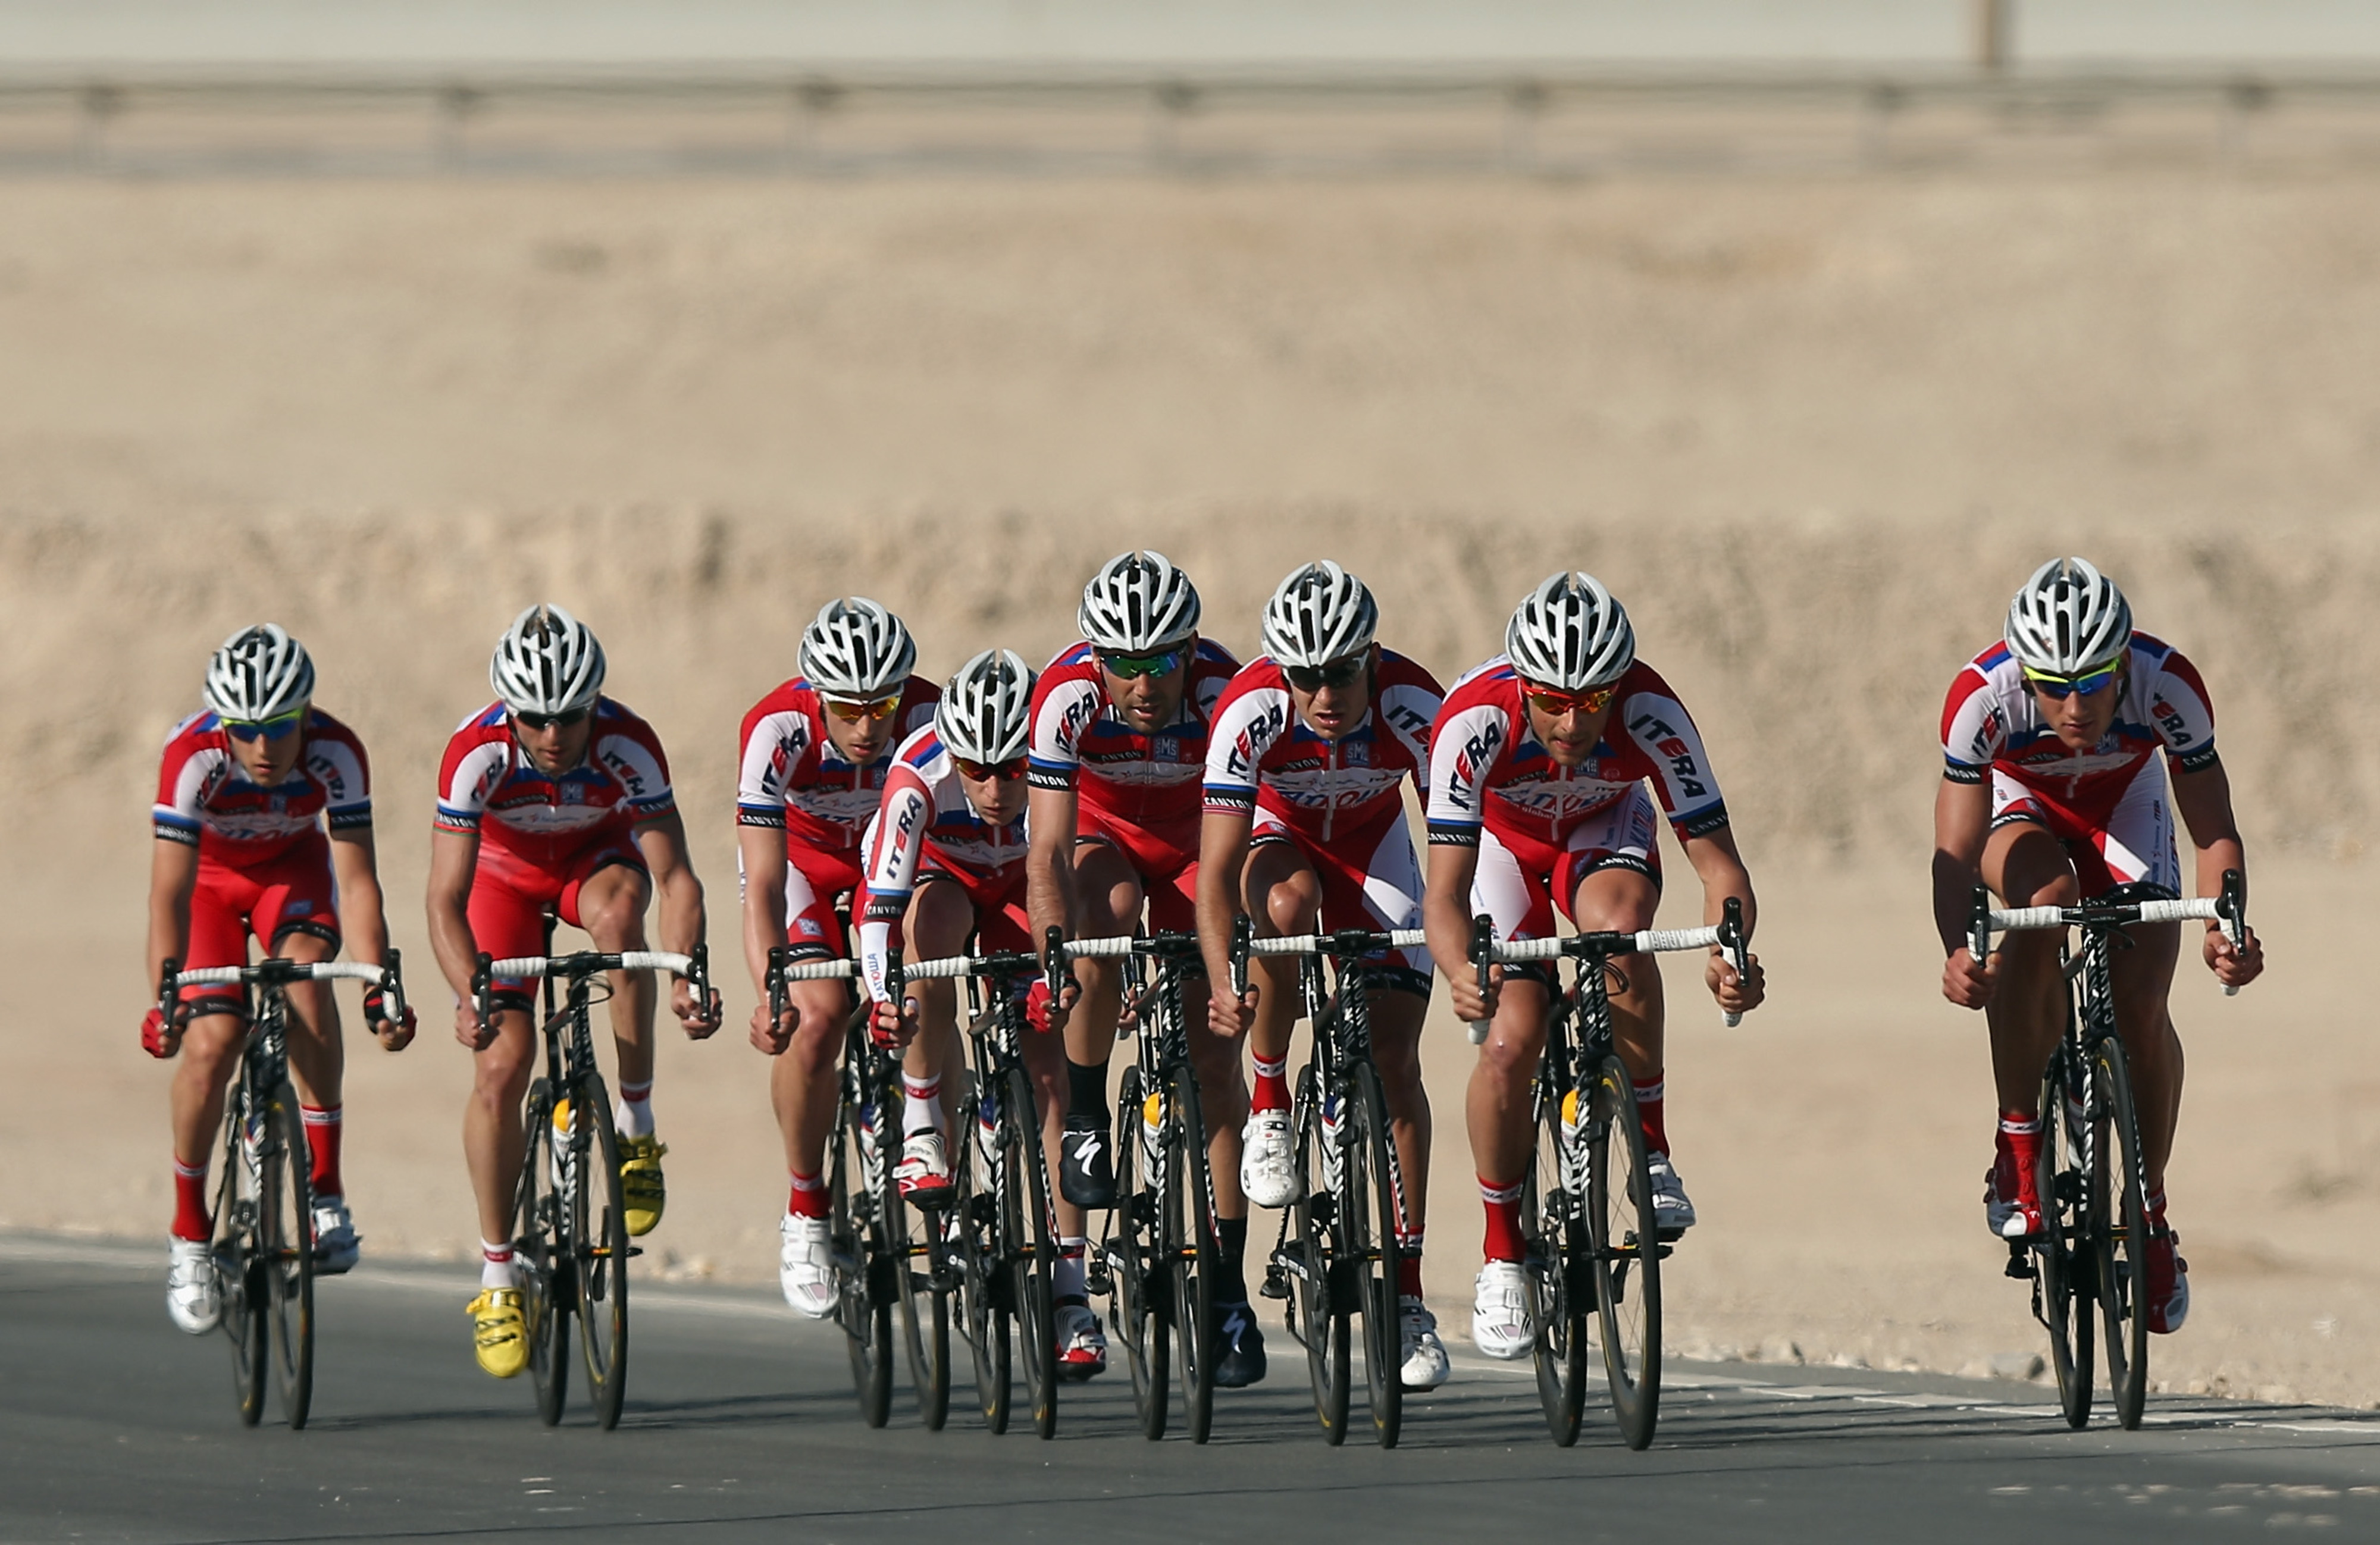 Katusha are back in the World Tour and all the biggest races, but how will organizers cope?